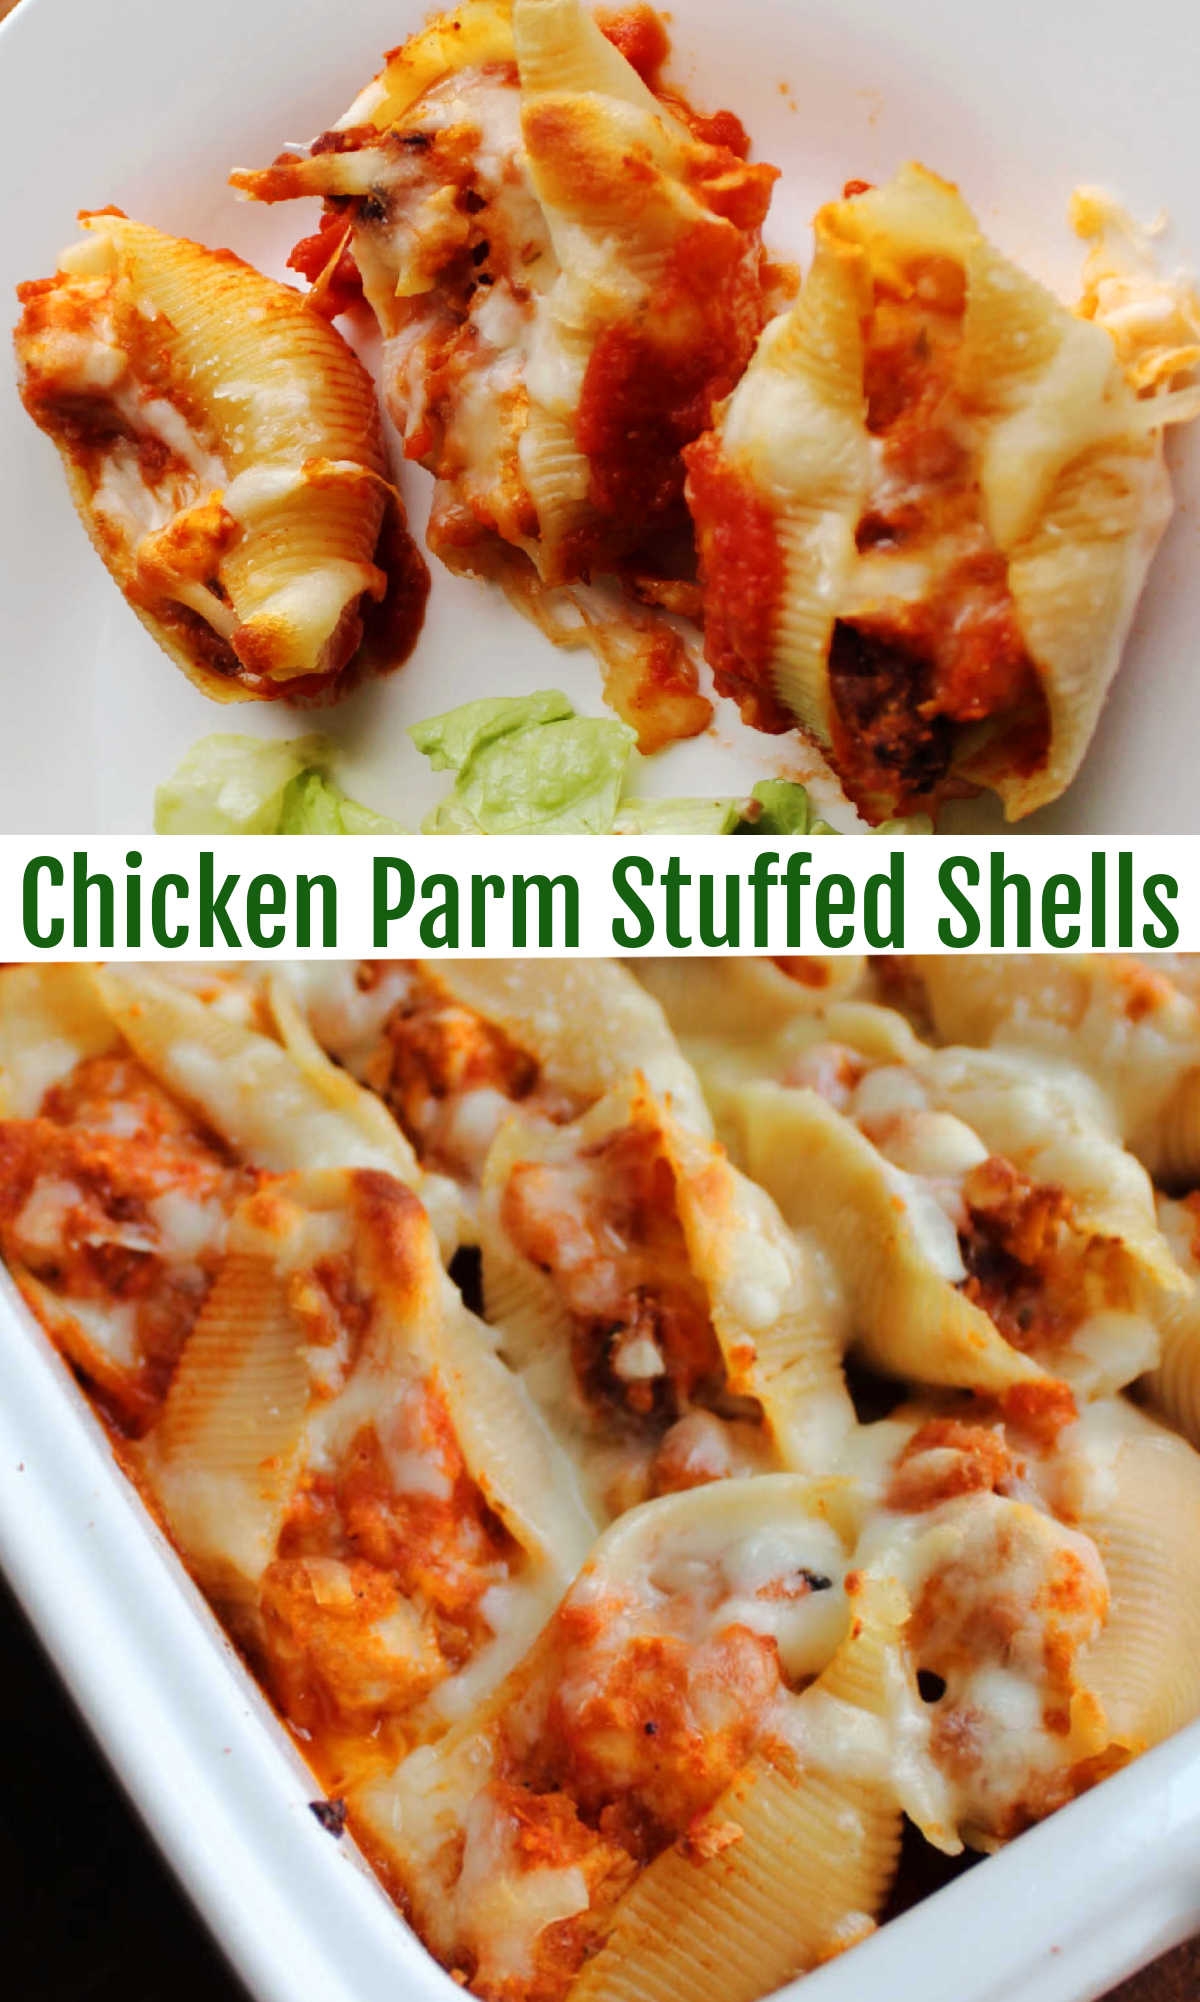 Chicken Parmesan stuffed shells are a mash up of two favorite restaurant dishes. It is baked to cheesy perfection and is sure to become a favorite meal at your family's dinner table.